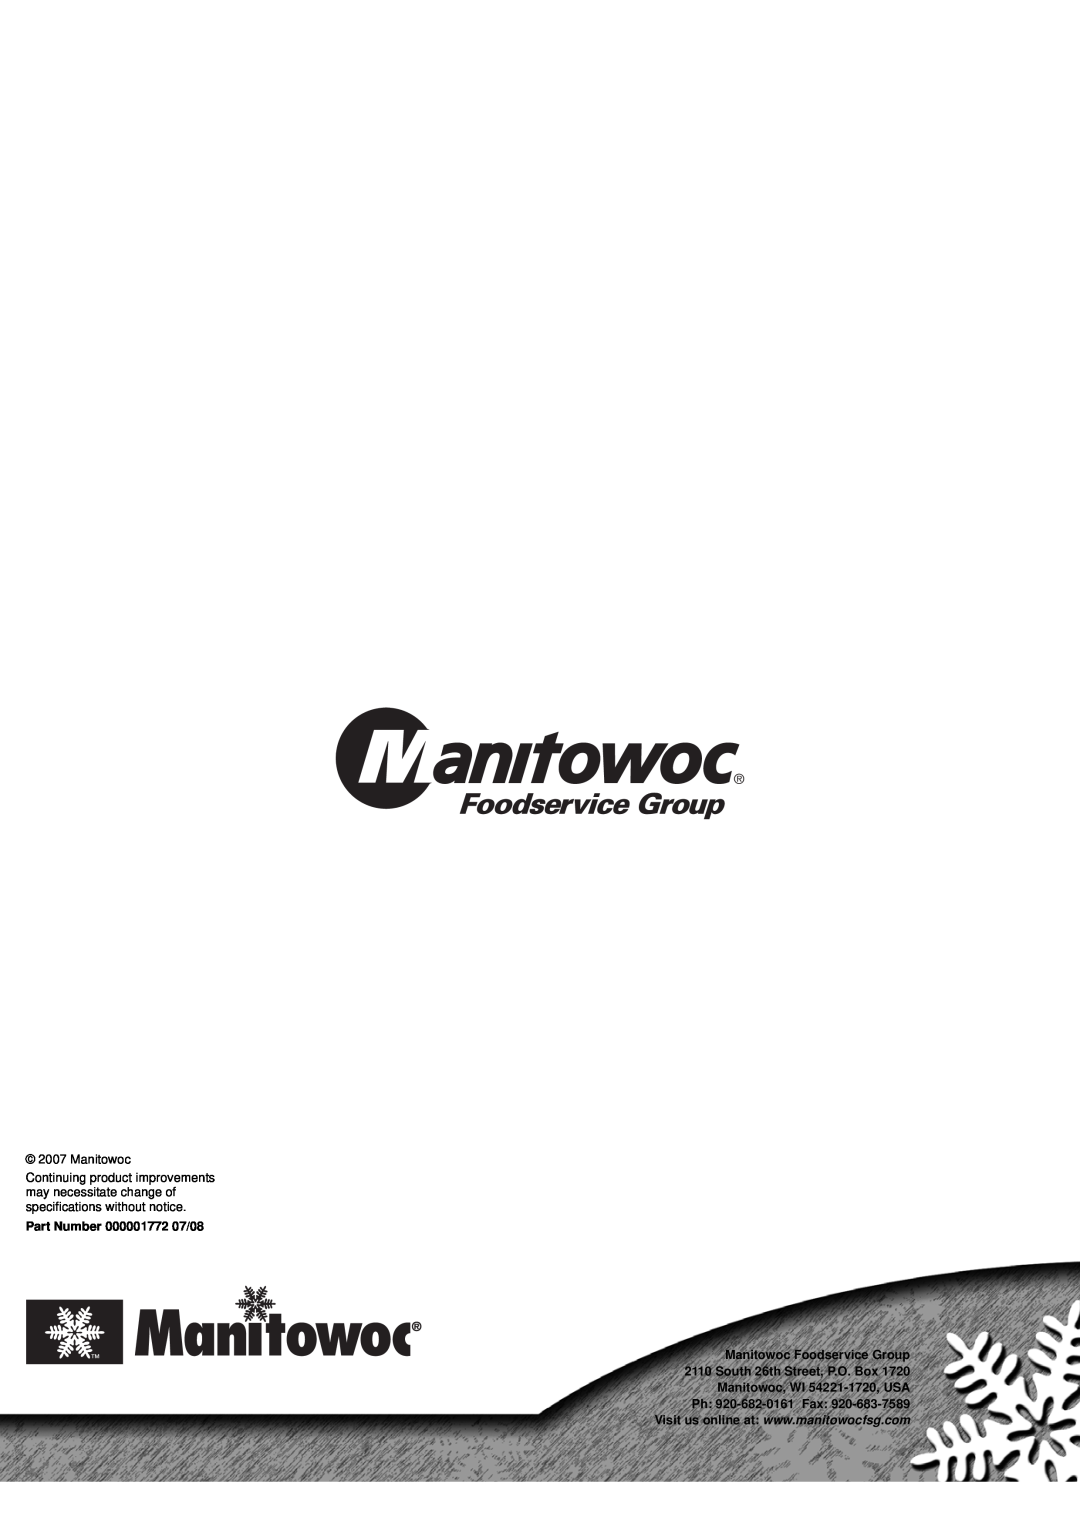 Manitowoc Ice QM30 manual Part Number 000001772 07/08, Manitowoc Foodservice Group, South 26th Street, P.O. Box 